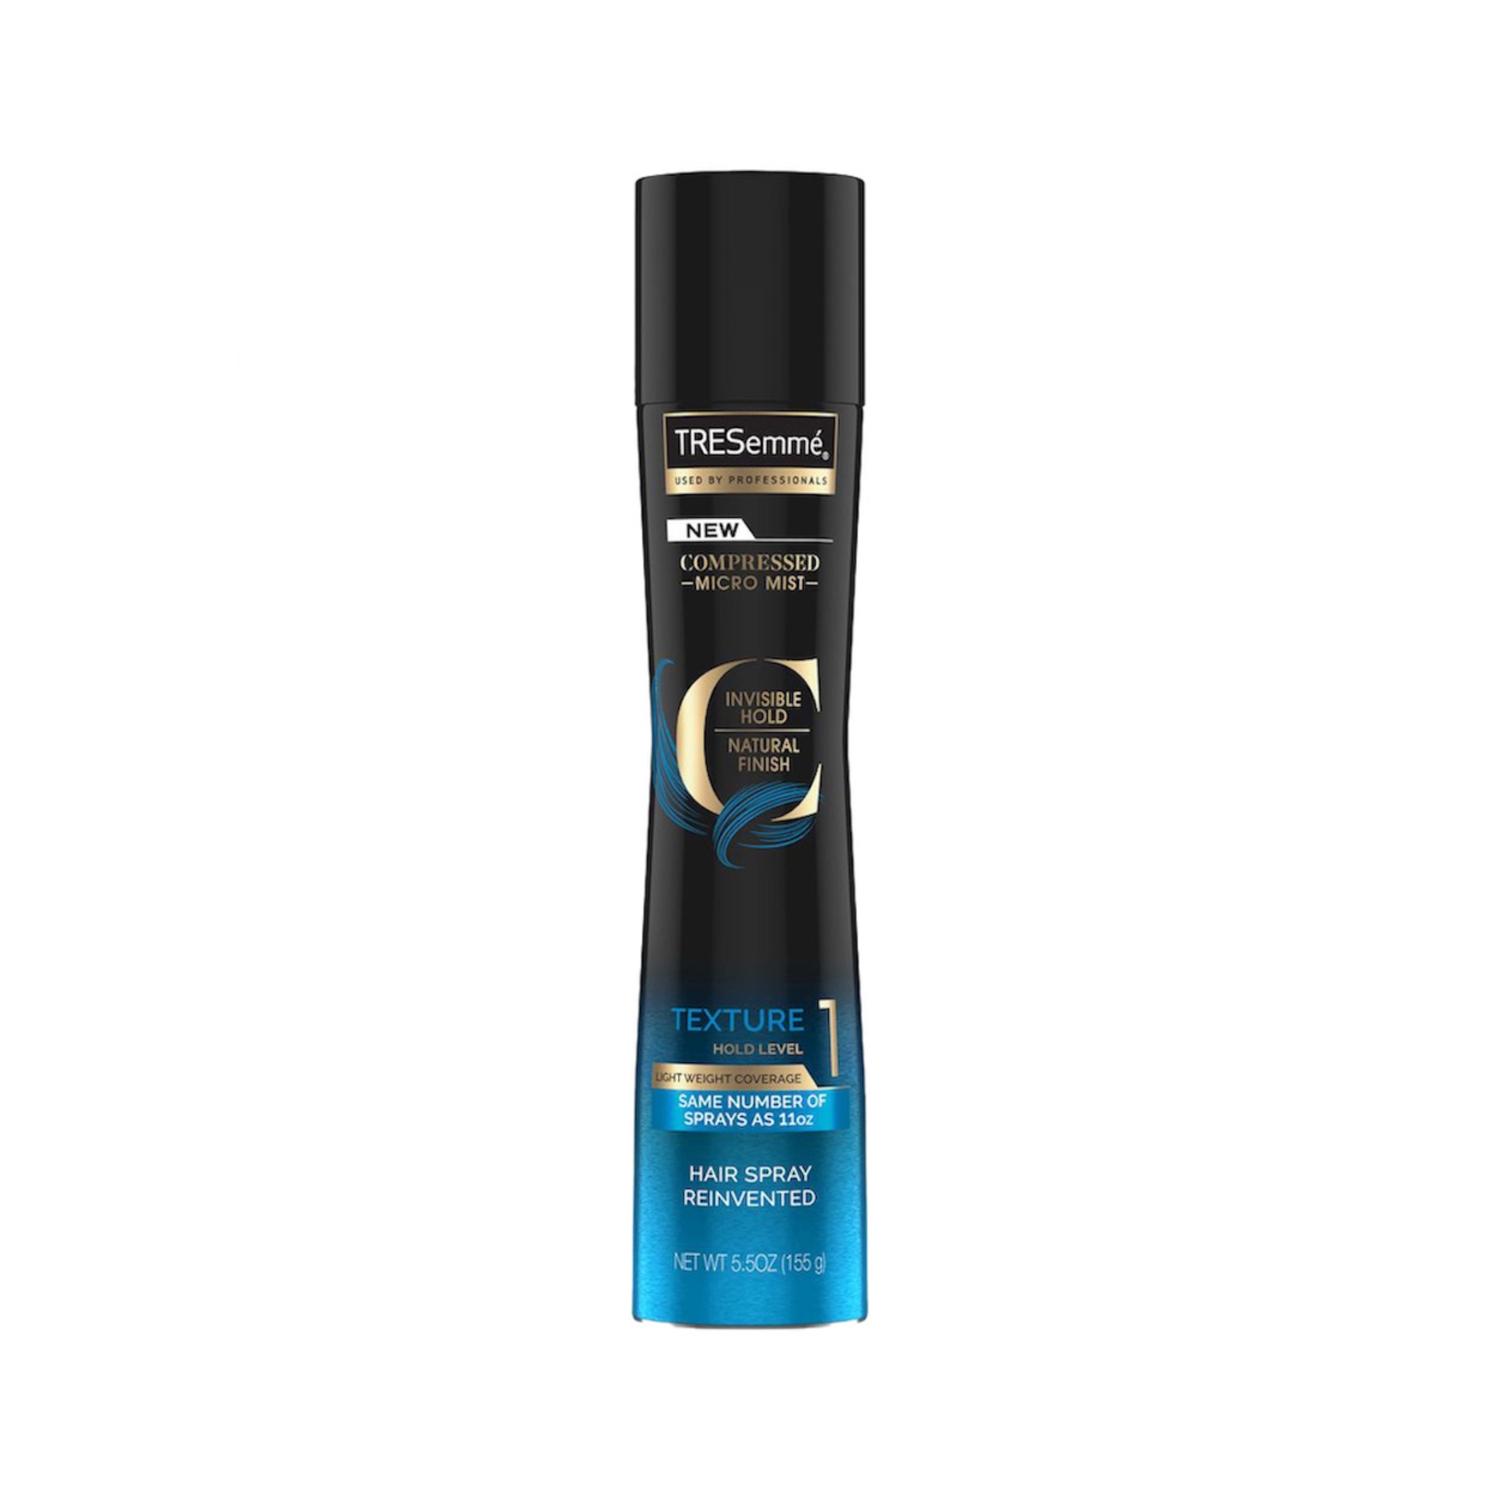 Tresemme | Tresemme Compressed Micro Mist Invisible Hold Natural Finish Extend Hold Level 1 Hair Spray (155g)